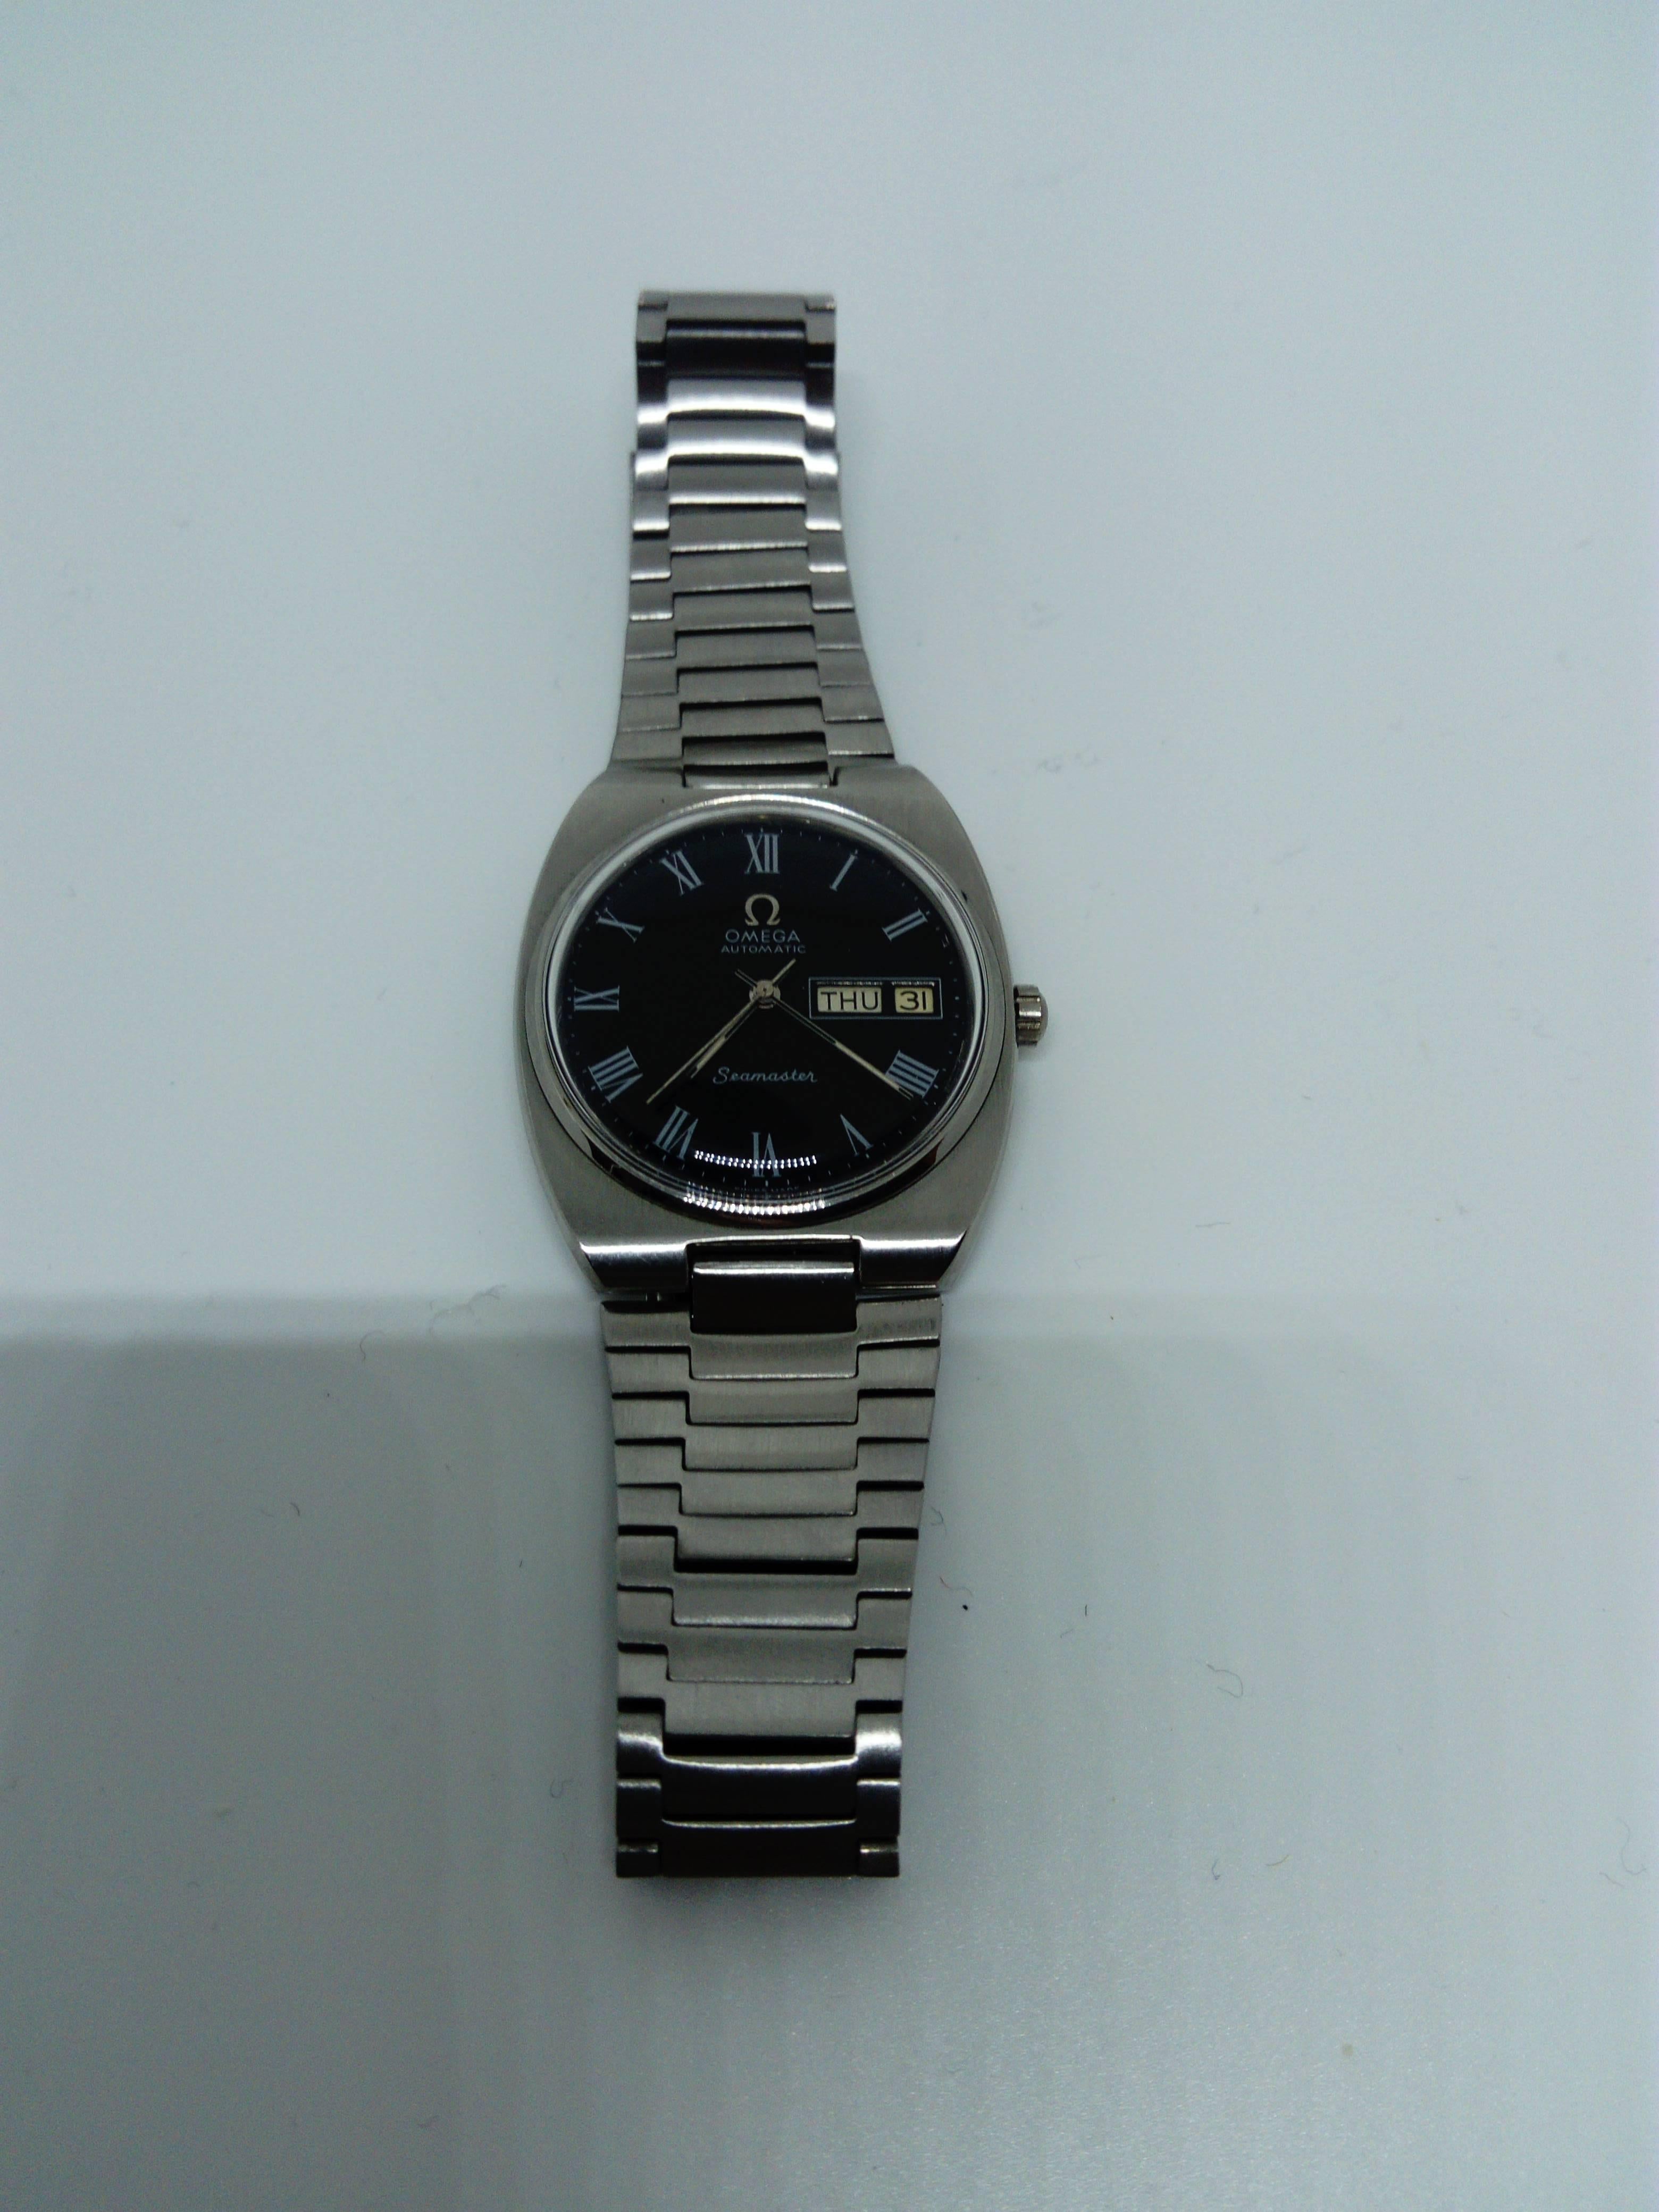 Omega
Seamaster
Day and date
Steel, steel bracelet. Black dial.
Automatic
36 x 38 mm